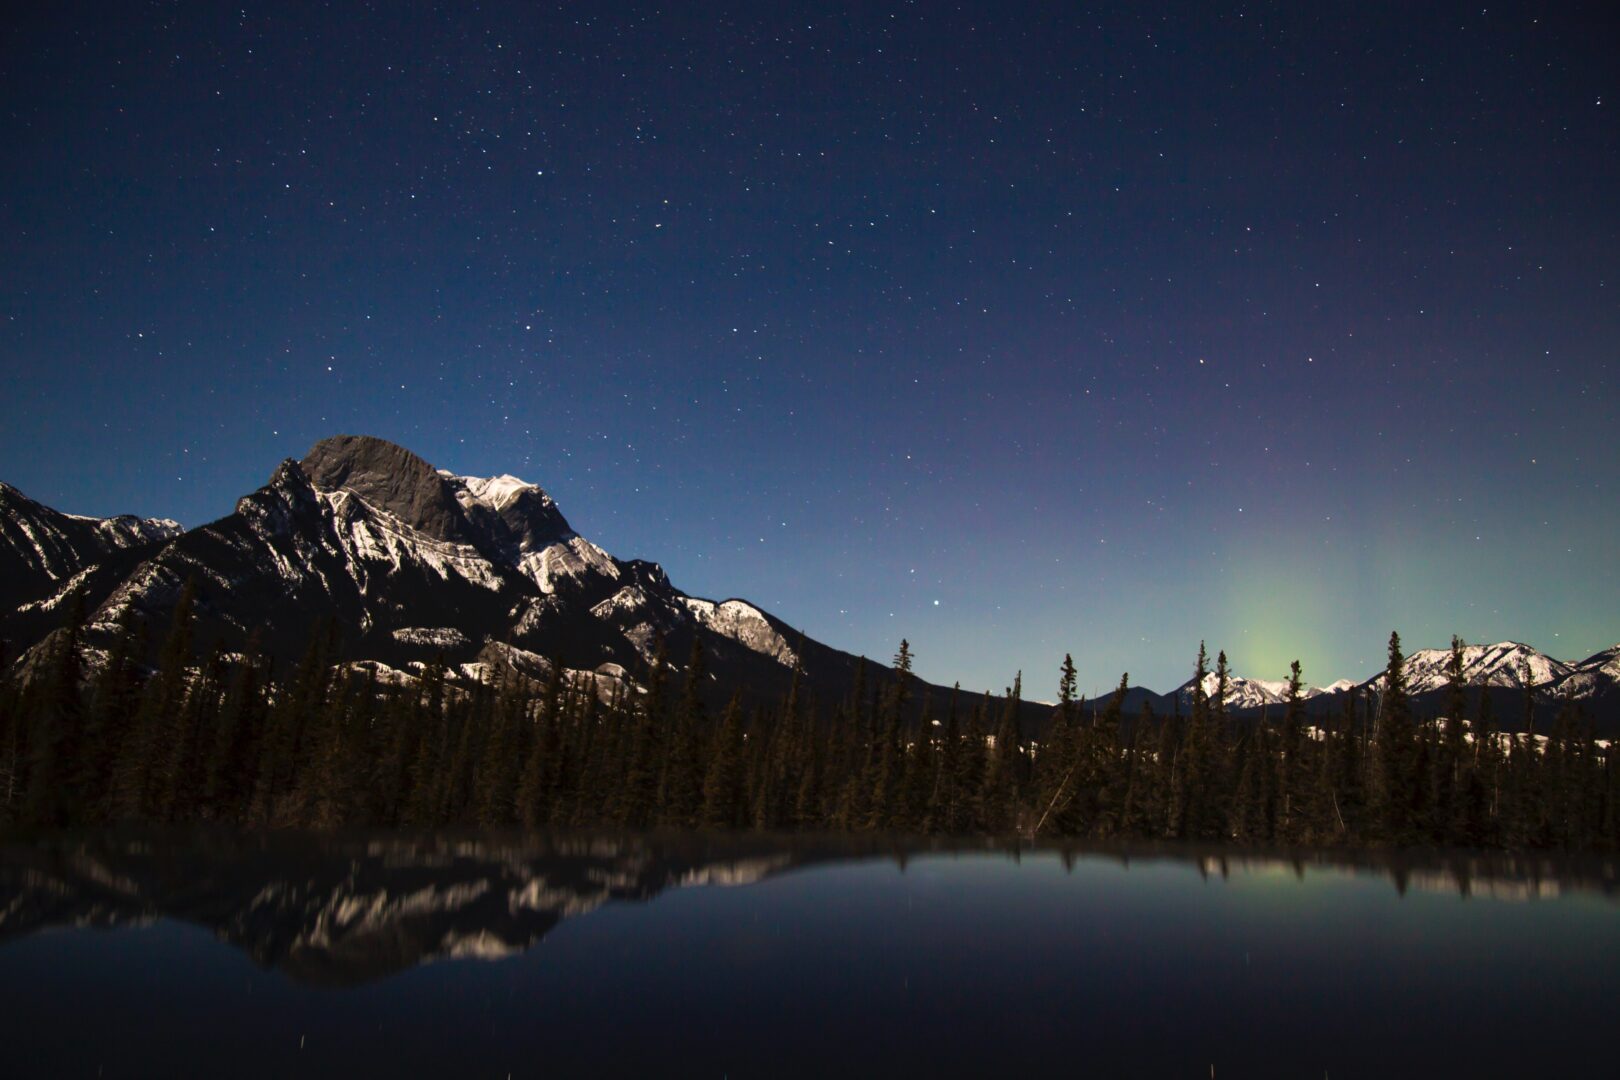 A starry night over a snow-capped mountain and alpine lake in Alberta.